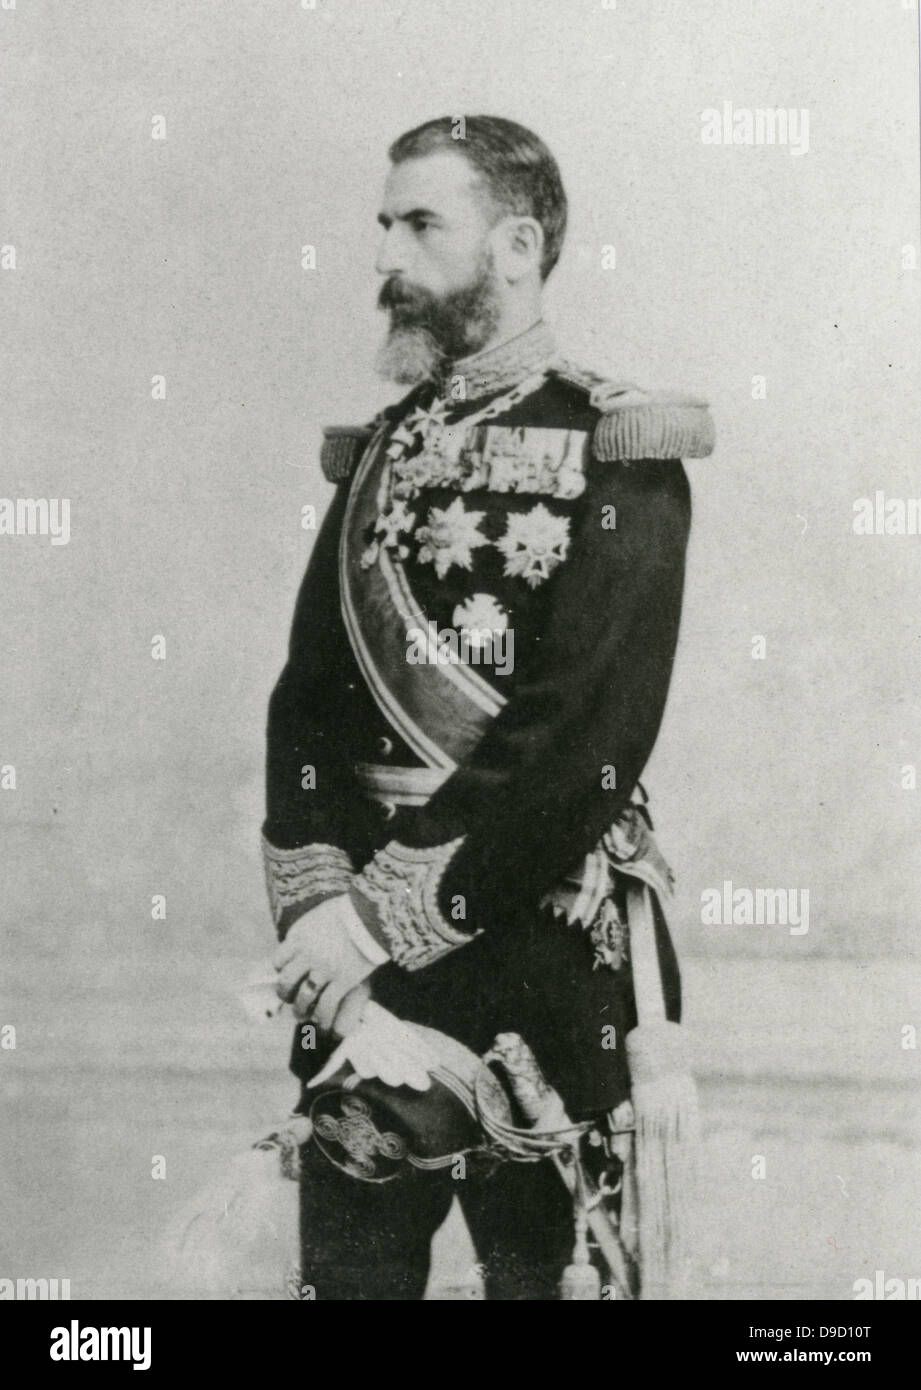 Carol I (1839-1914) born Prince Karl of Hohenzollern-Sigmaringen, reigning  prince and then King of Romania 1866-1914. Carol I in military uniform. Stock Photo